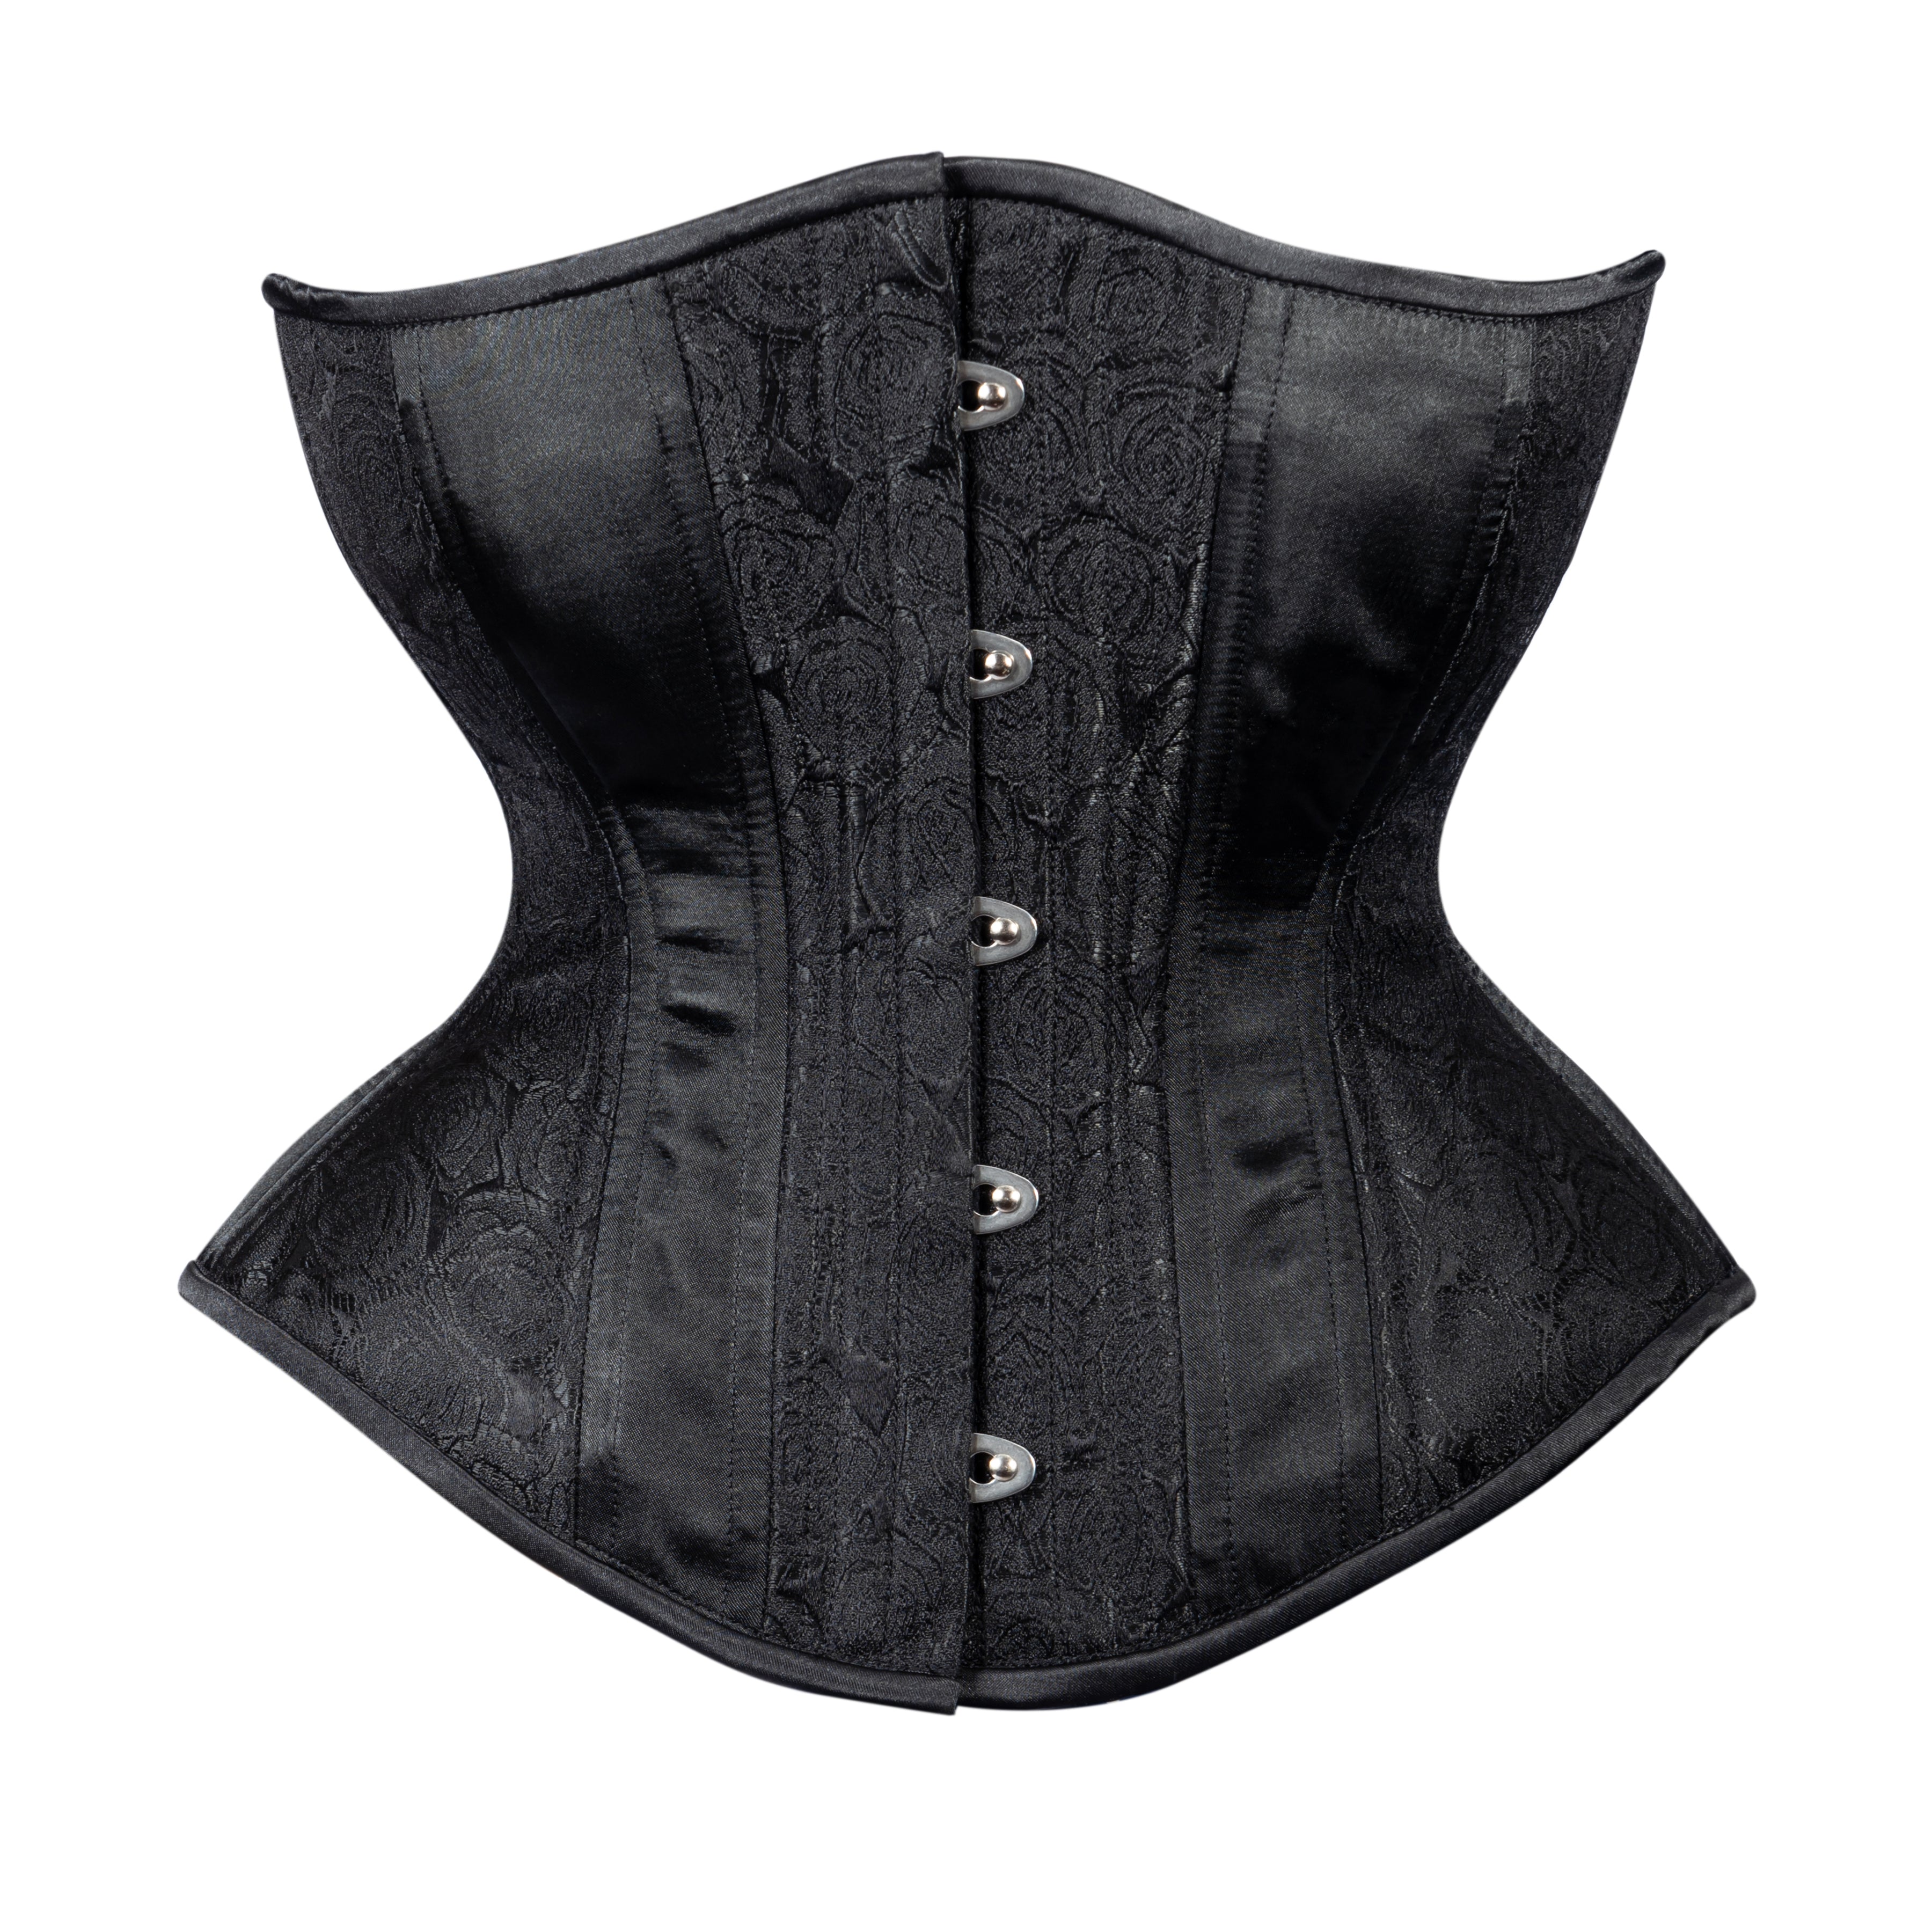 Adult Waist Cincher Corset with Lace Up & Zipper, Black, One Size, Wearable  Costume Accessory for Halloween